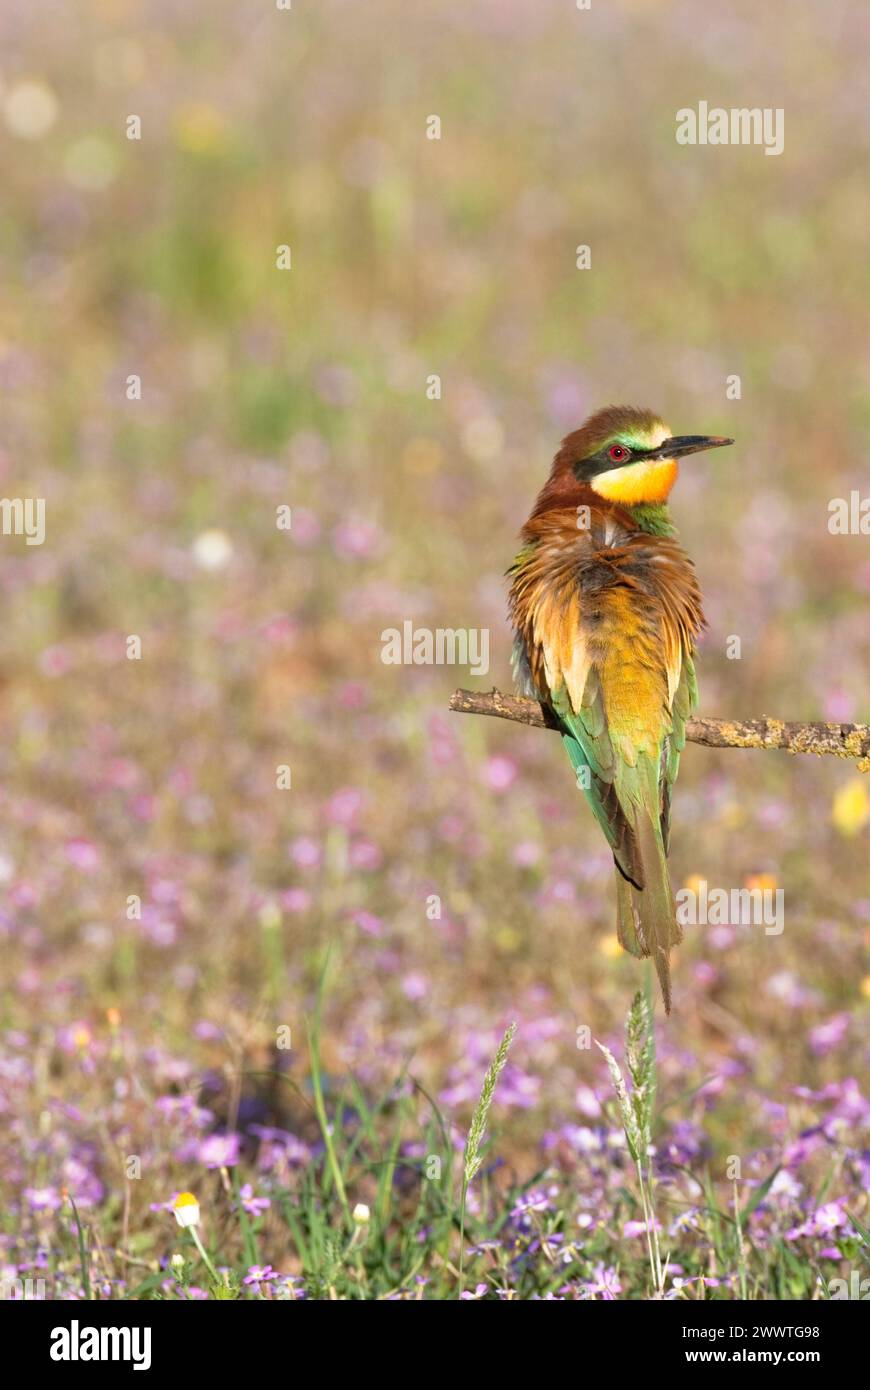 European Bee-eater (Merops apiaster) perched on branch in open field with flowers. Andalucia, Spain. Stock Photo